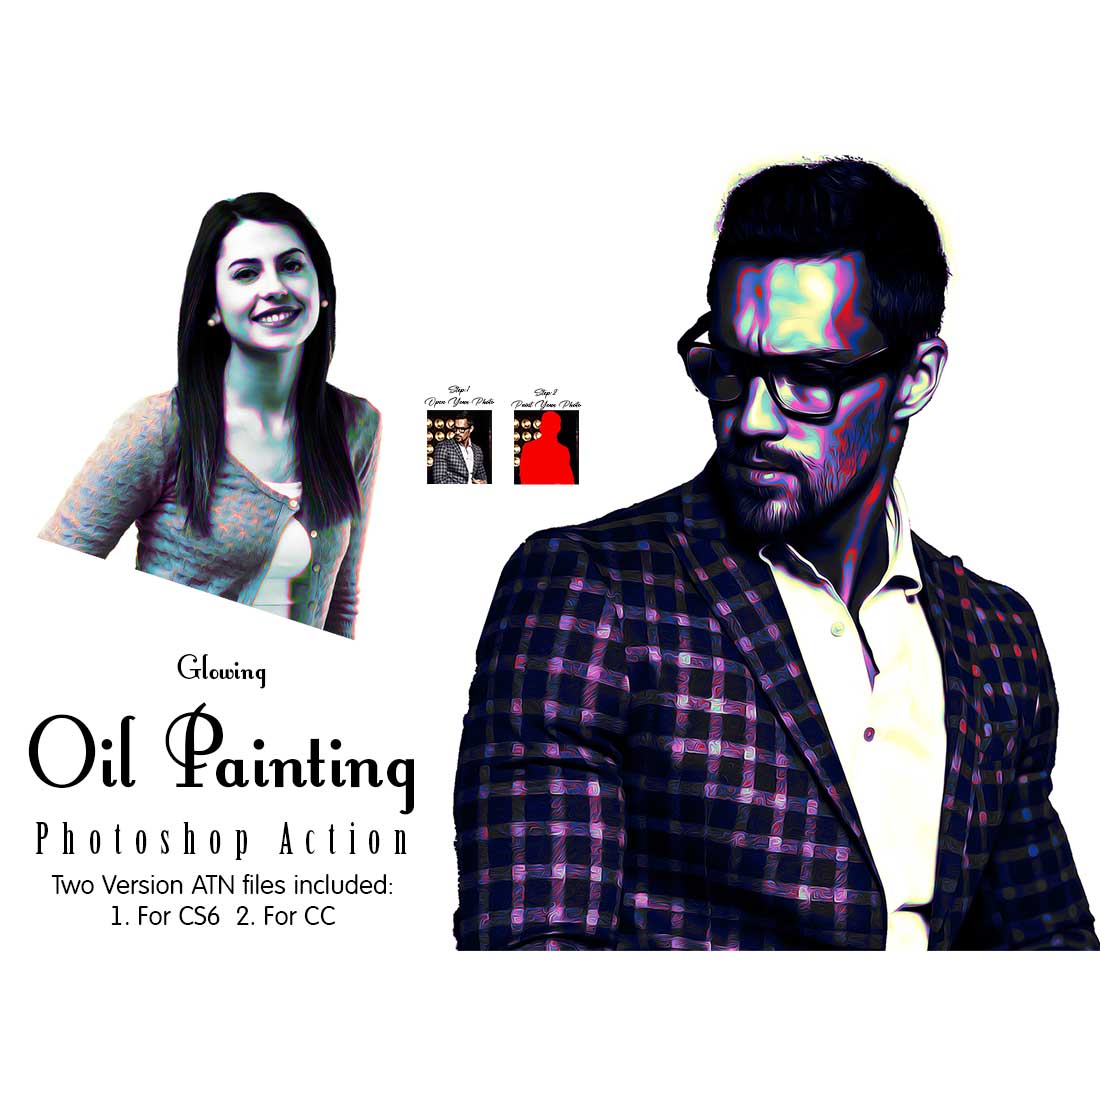 Glowing Oil Painting Photoshop Action cover image.